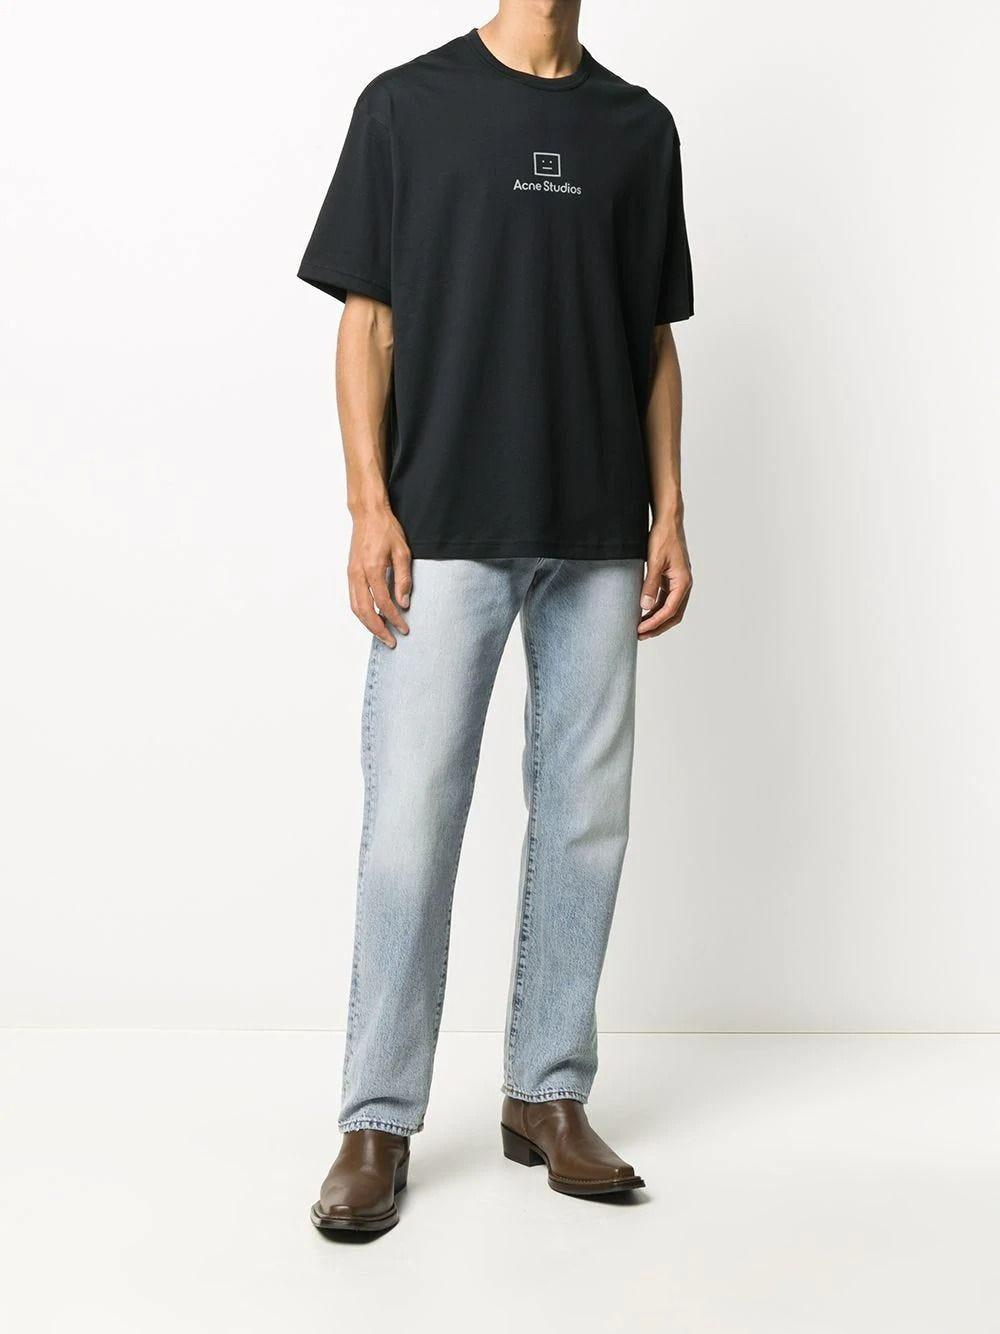 Acne Studios Reflective Face T-shirt in Black for Men | Lyst